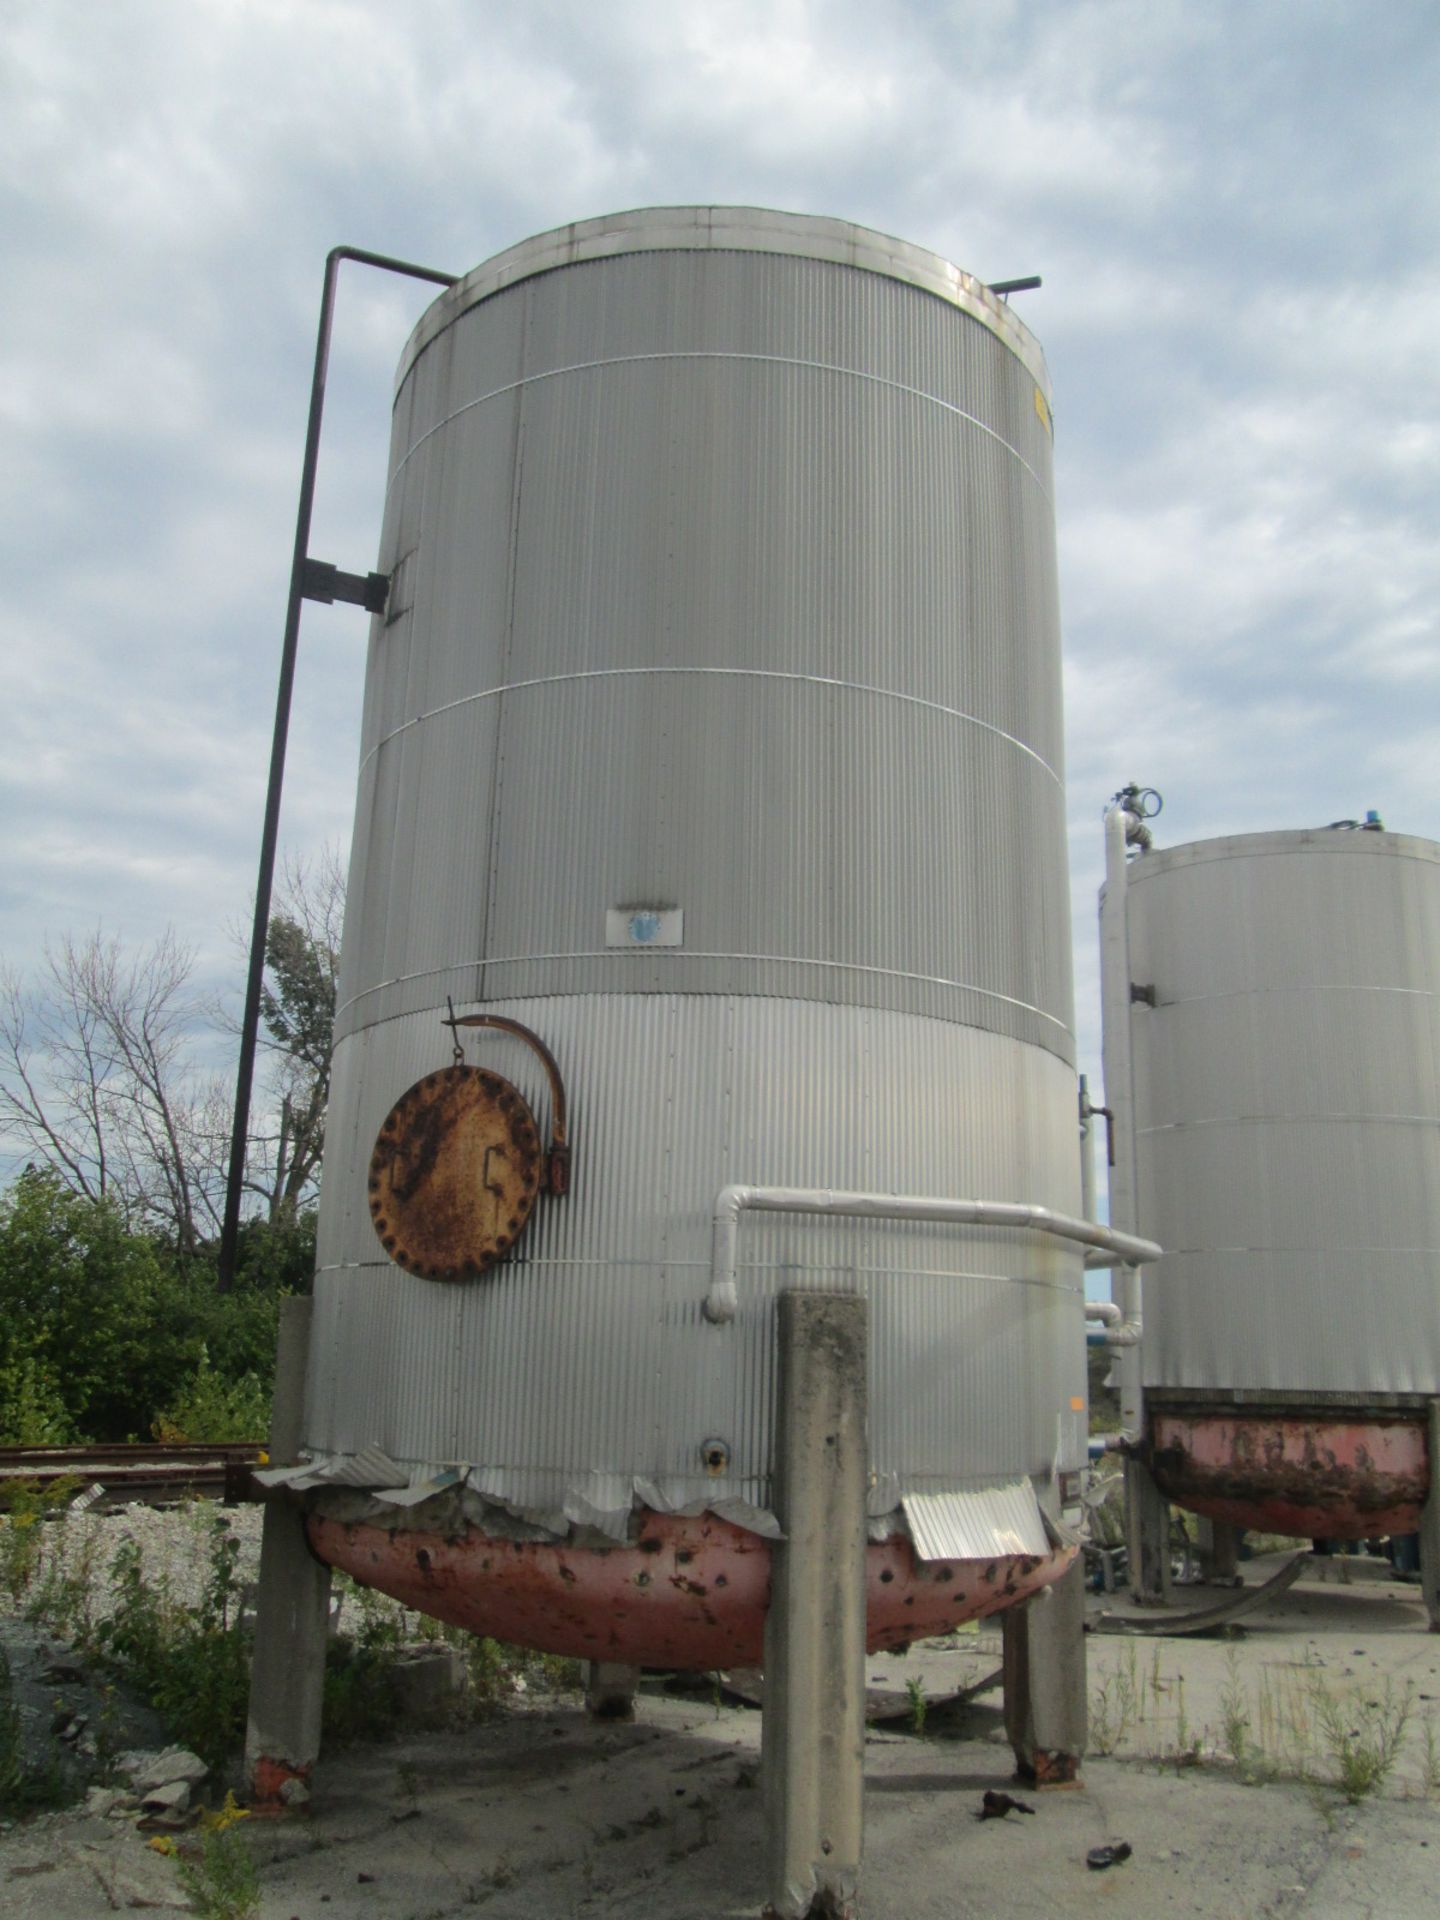 14500 O'Conner storage tank, carbon steel construction, 11'6" diameter x 18' straight side, dish top - Image 7 of 7